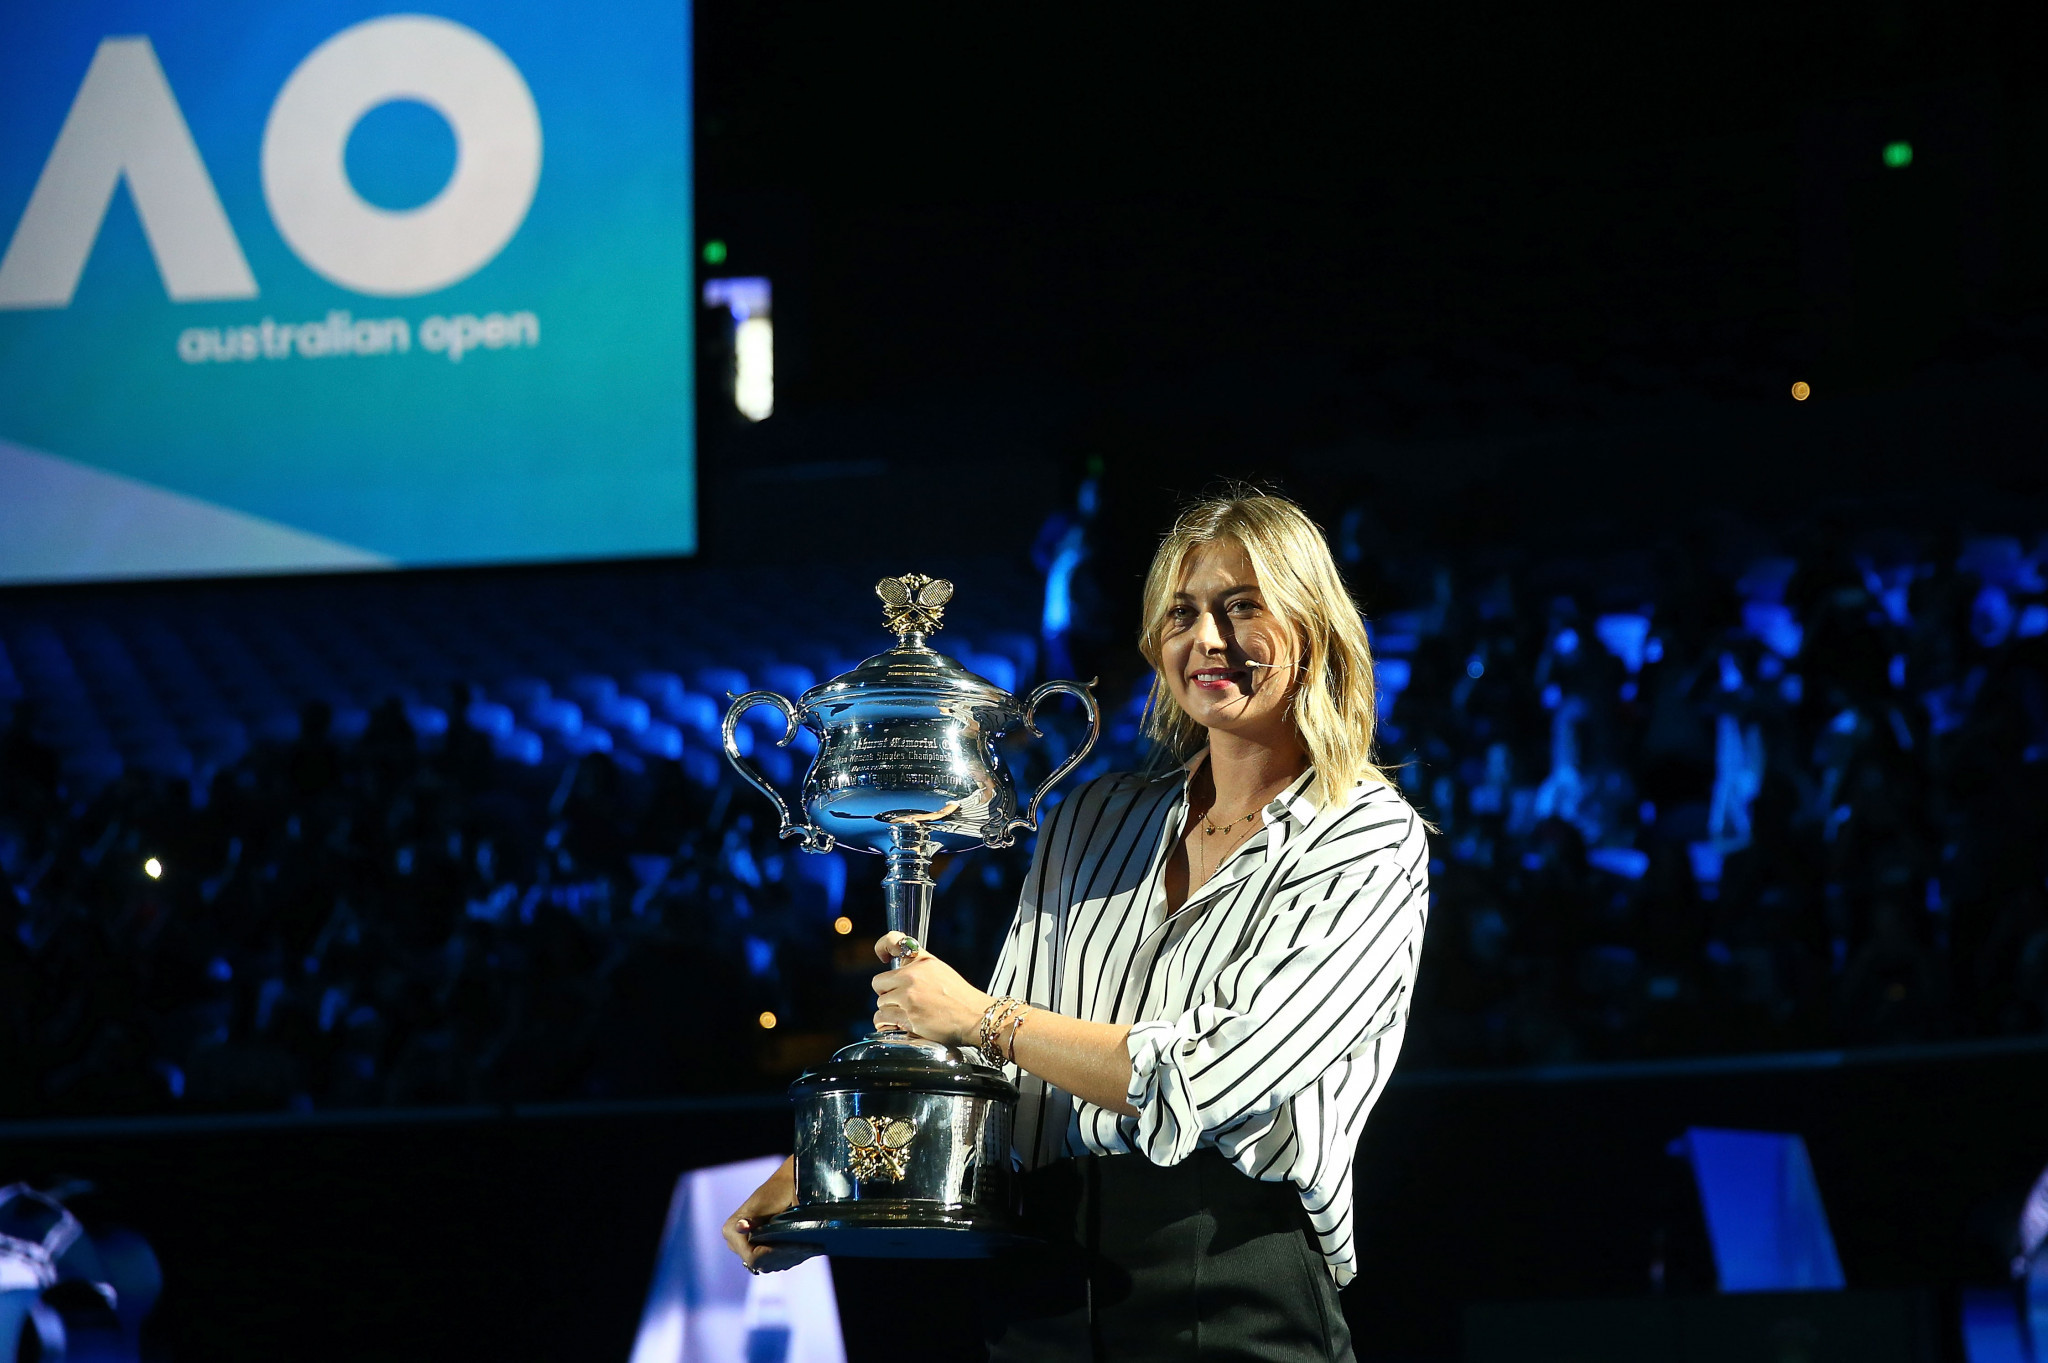 Maria Sharapova carried the women's Australian Open trophy at the draw ceremony ©Getty Images